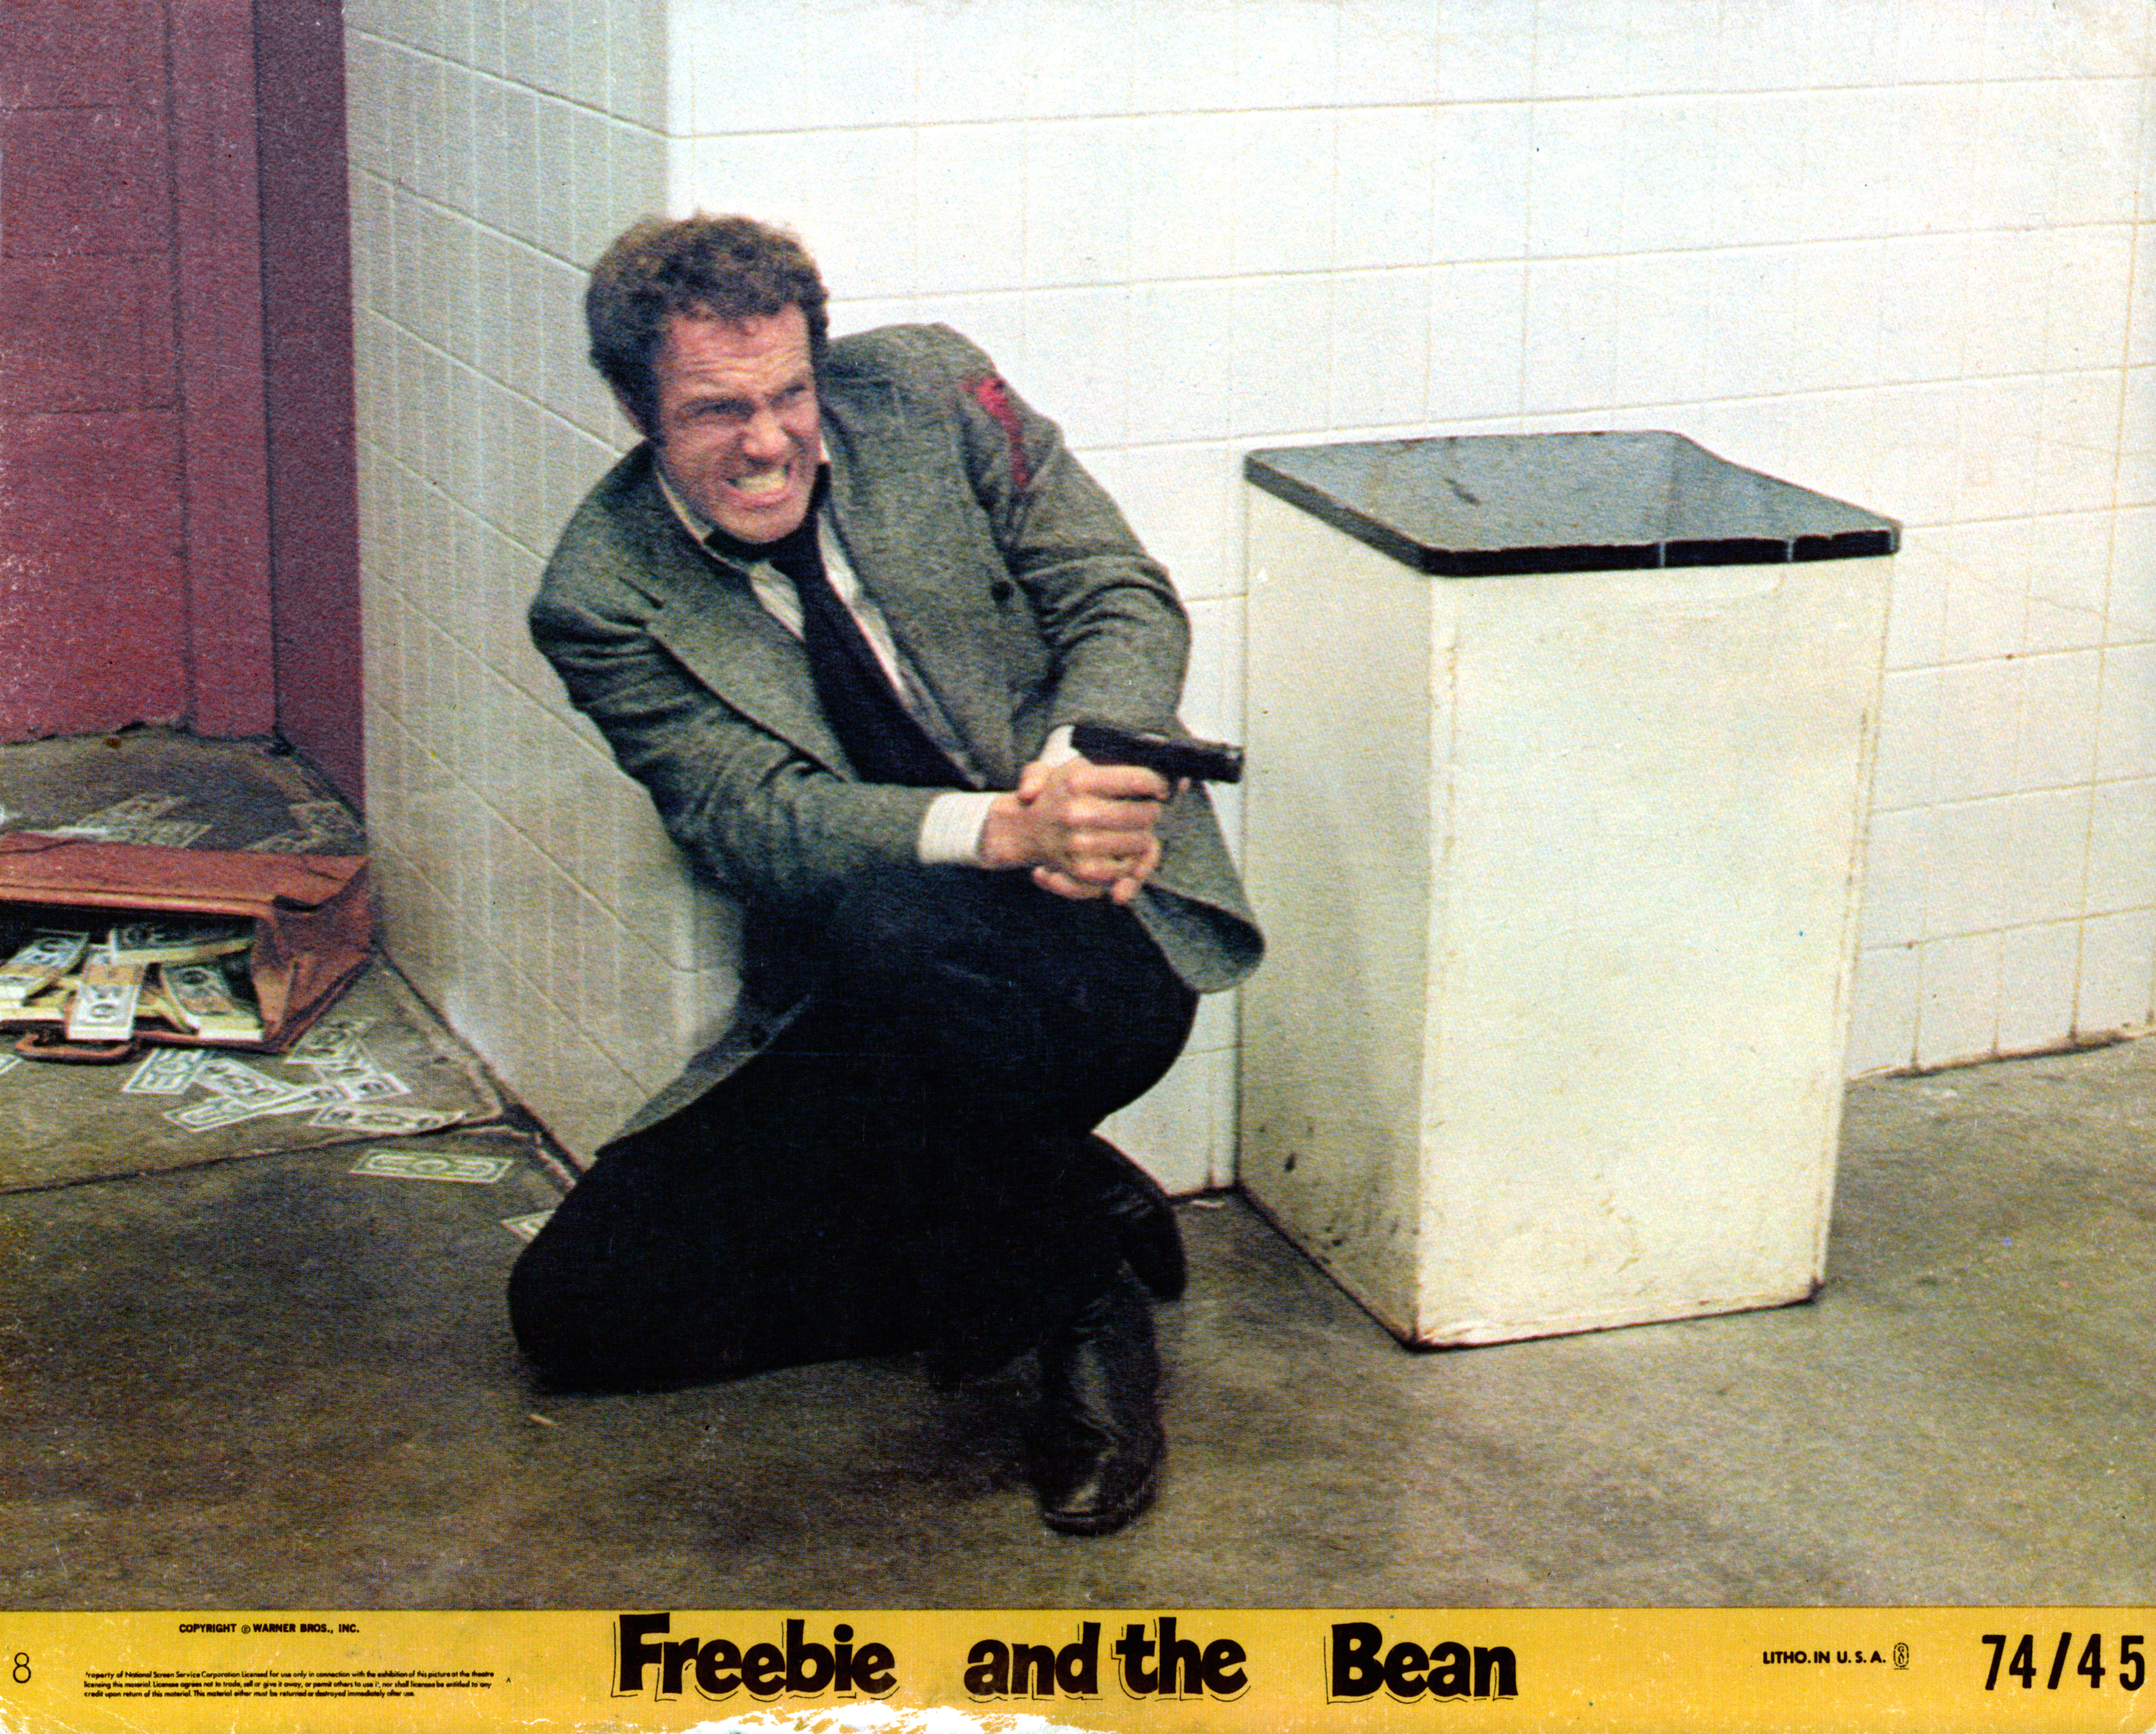 James Caan in Freebie and the Bean (1974)